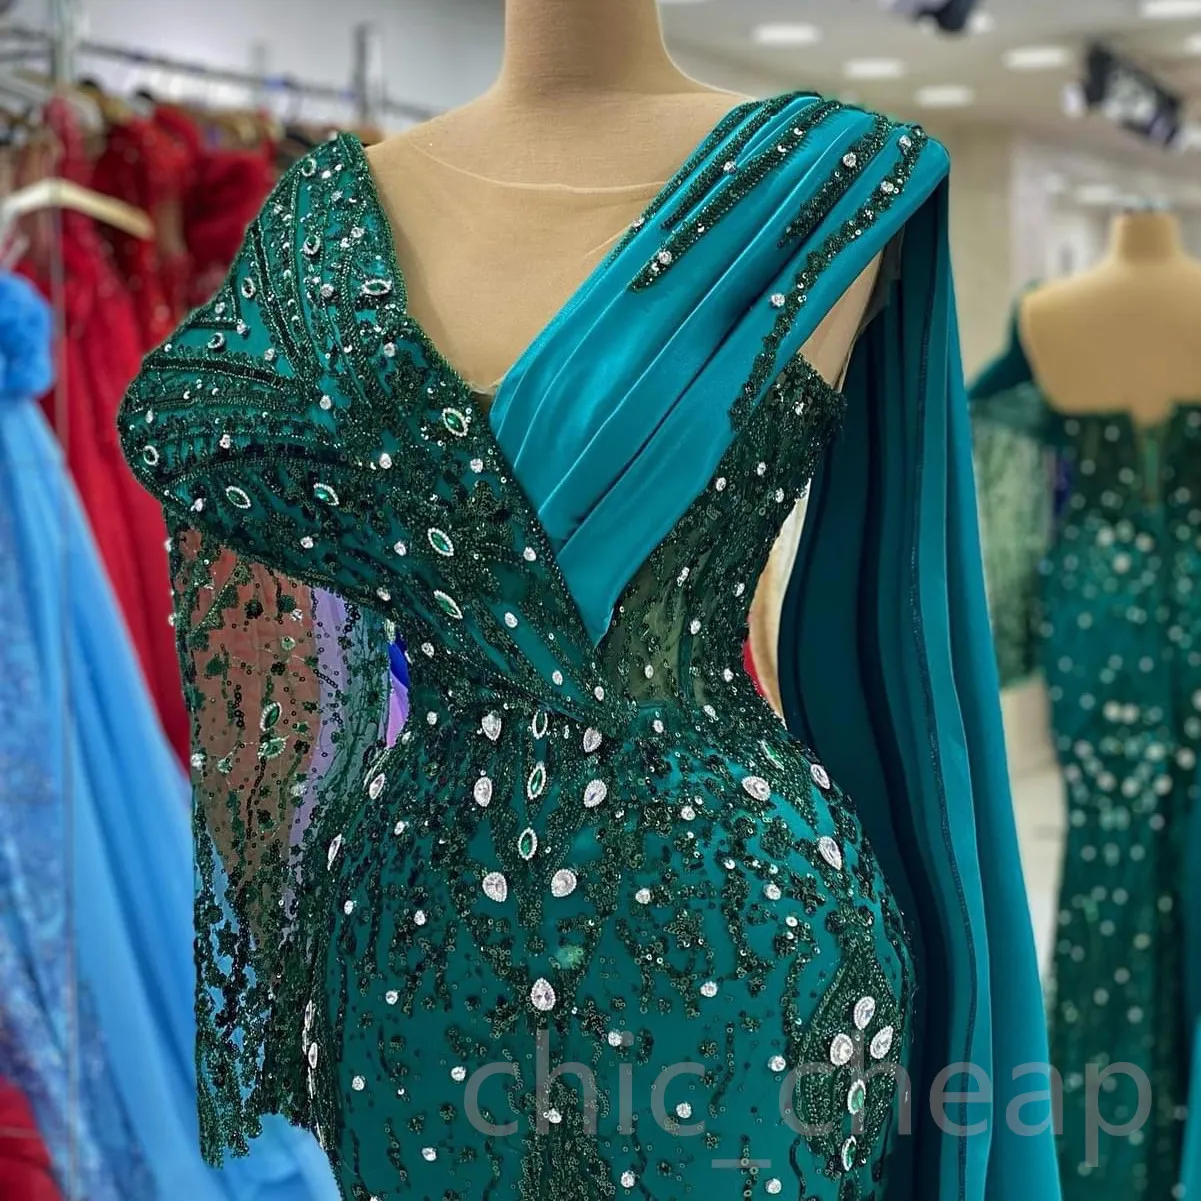 2023 Aso Ebi Hunter Green Mermaid Prom Dress Crystals Evening Formal Party Second Reception Birthday Bridesmaid Engagement Gowns Dresses Robe De Soiree ZJ694